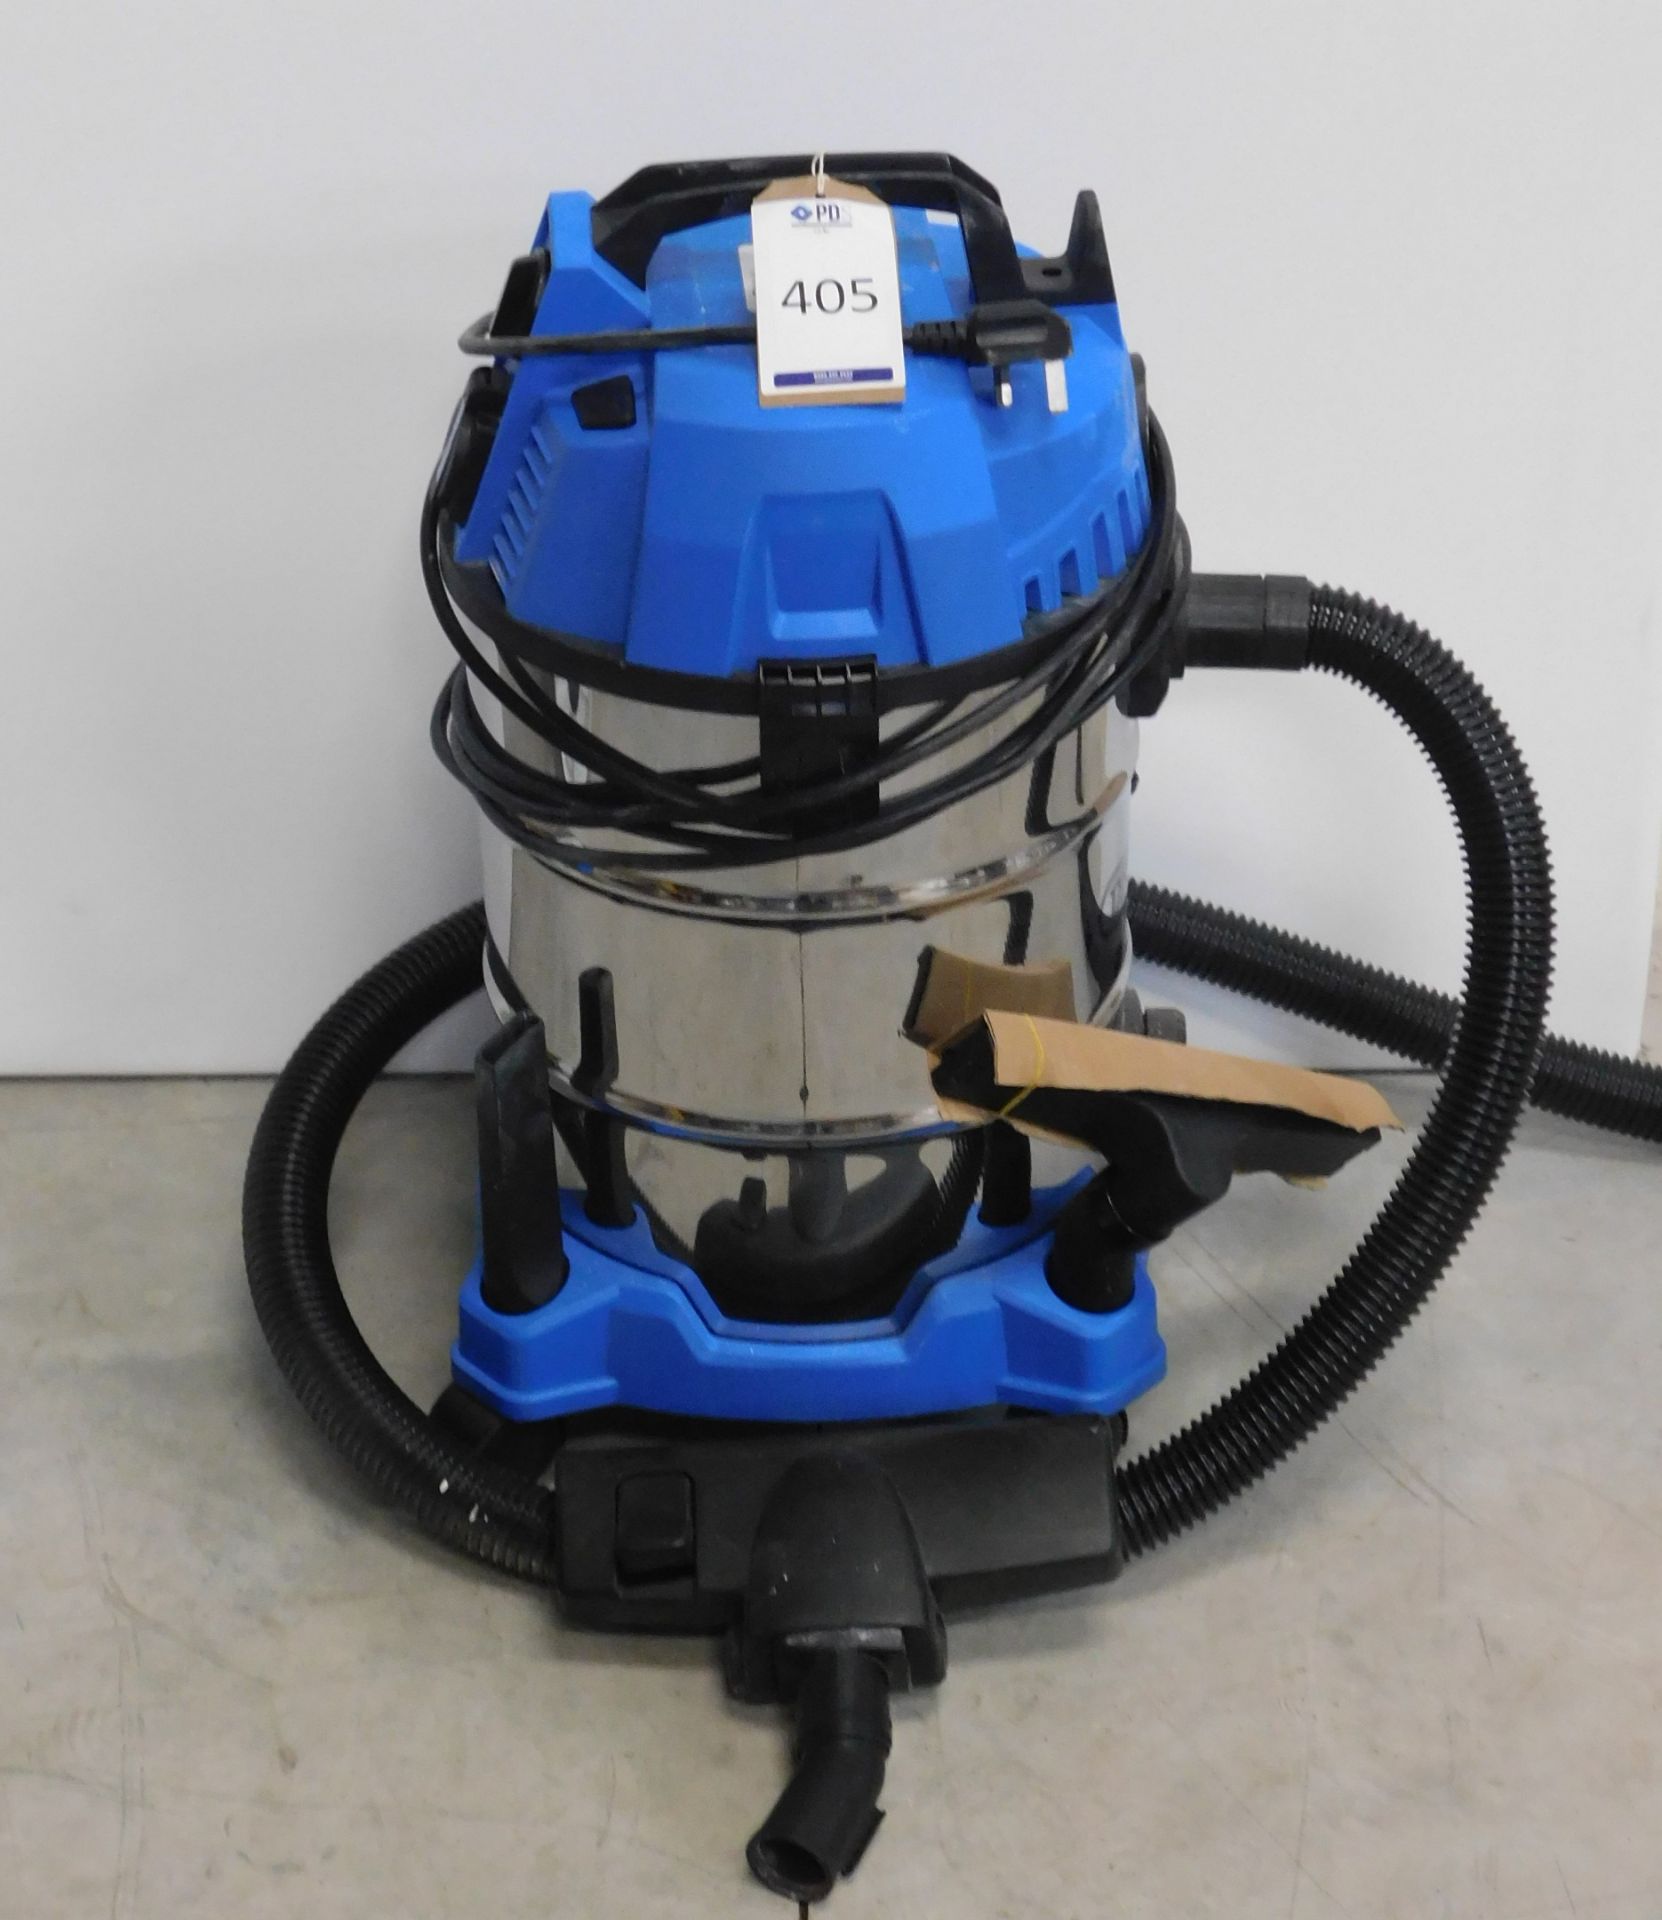 Draper 20529 Wet & Dry Vacuum Cleaner with Attachments (Located: Brentwood. Please Refer to